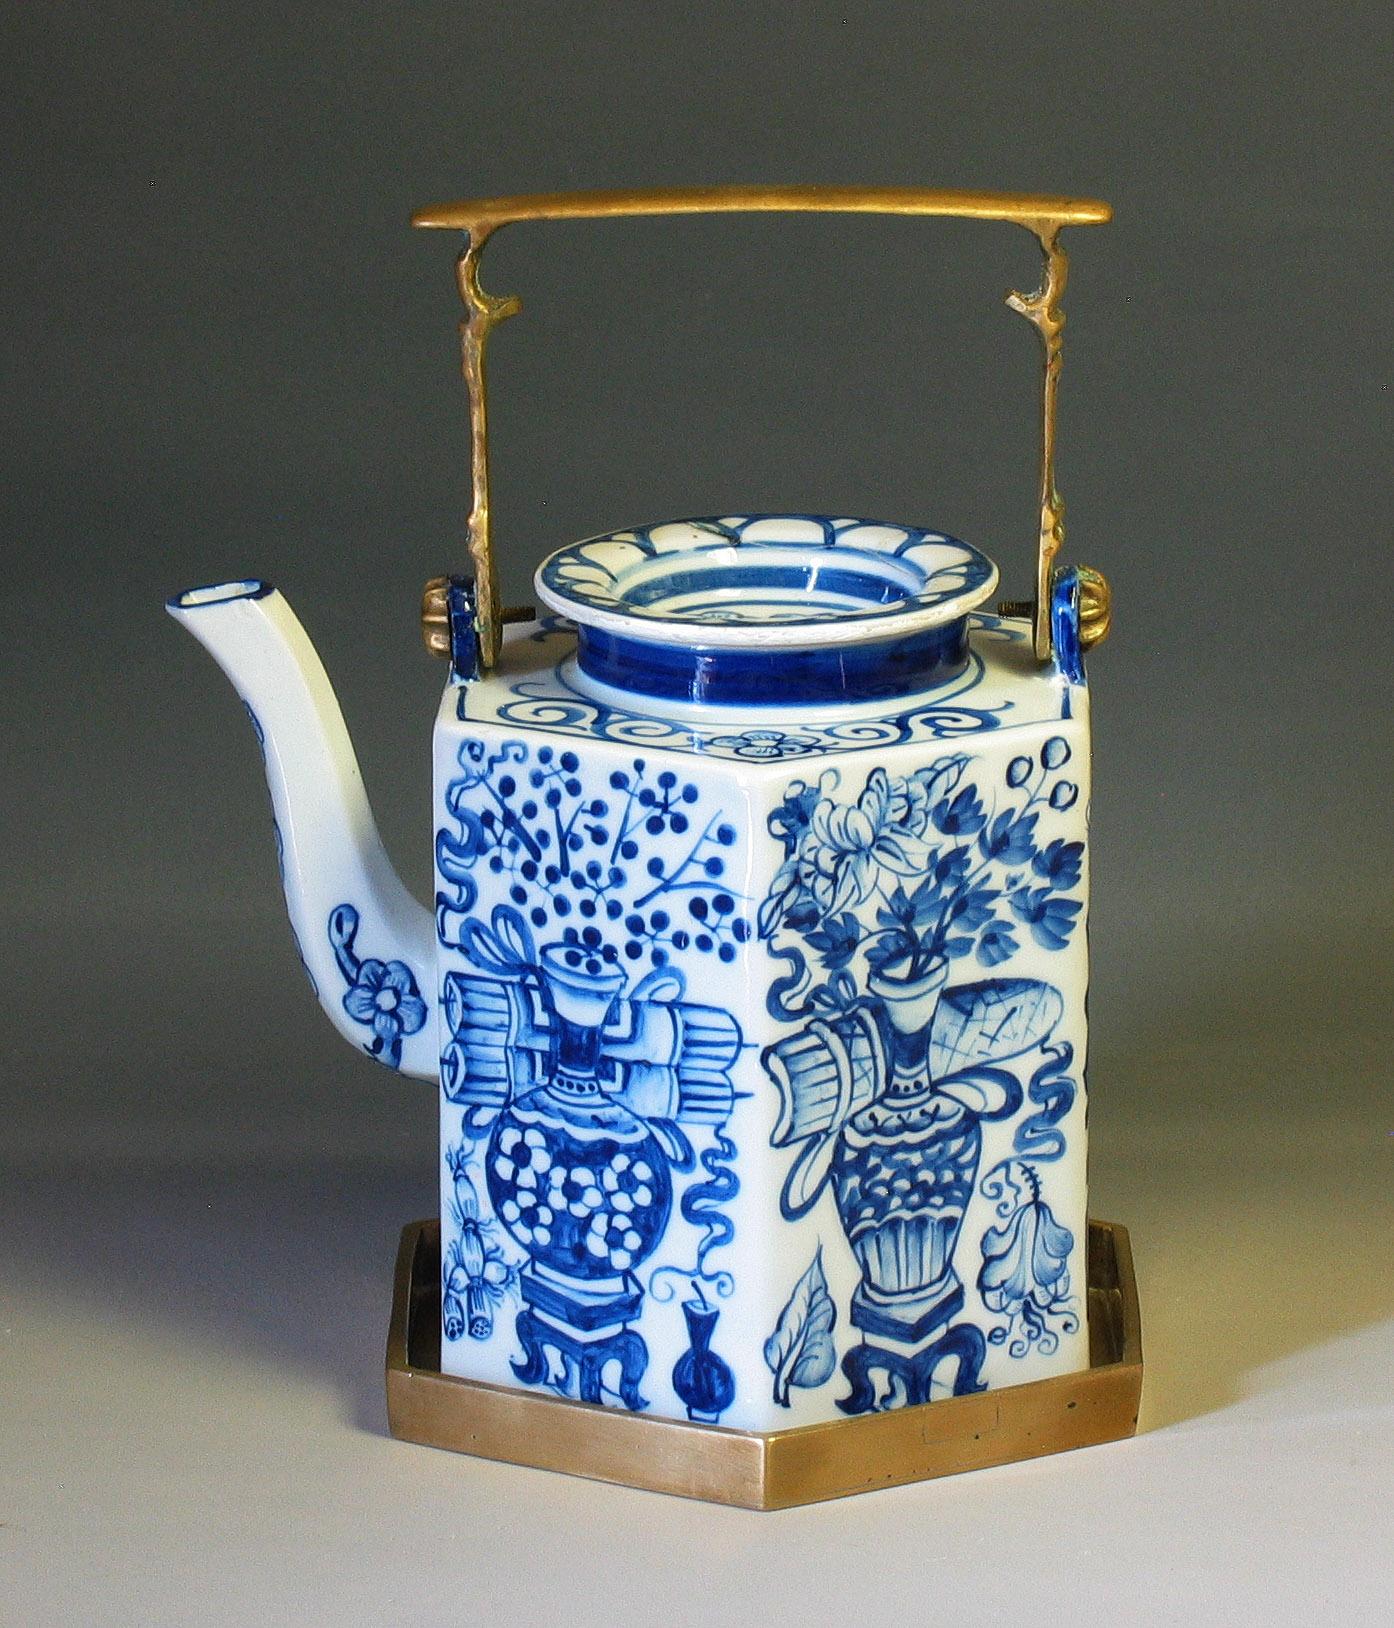 Porcelain Charming Chinese Export Hexagonal Blue & White Teapot with Brass Handle & Tray